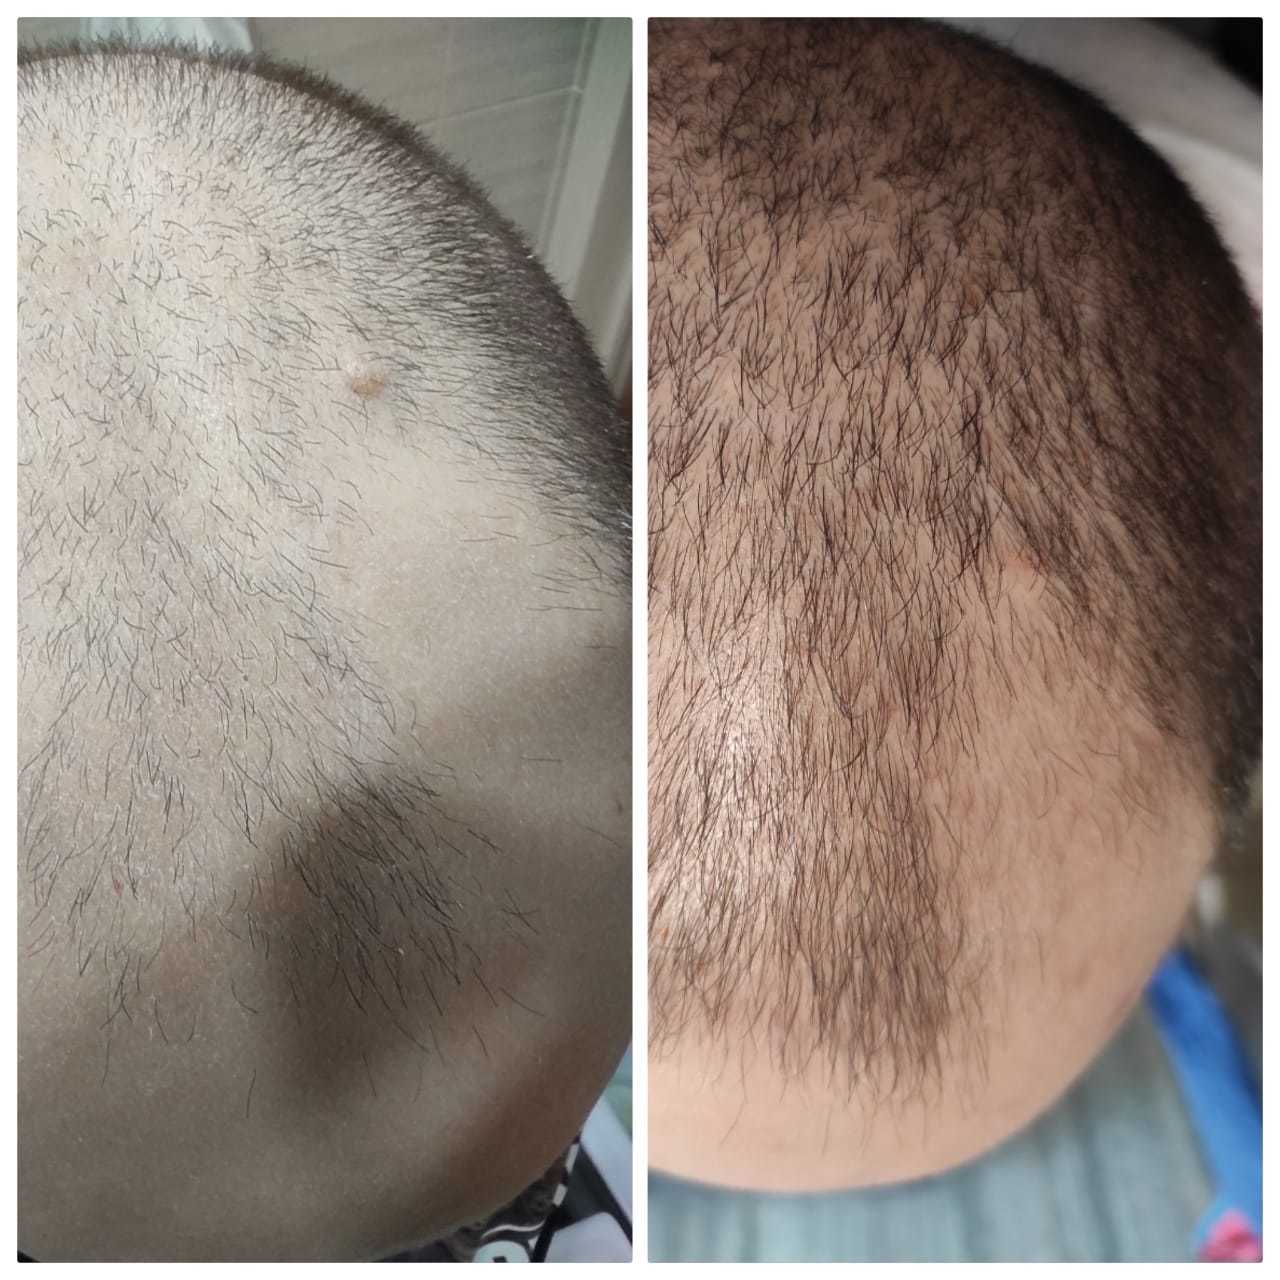 We treat baldness! 32 years. result in 2.5 months - My, Bald head, Treatment, Medications, Allopecia, Longpost, Minoxidil, Recommendations